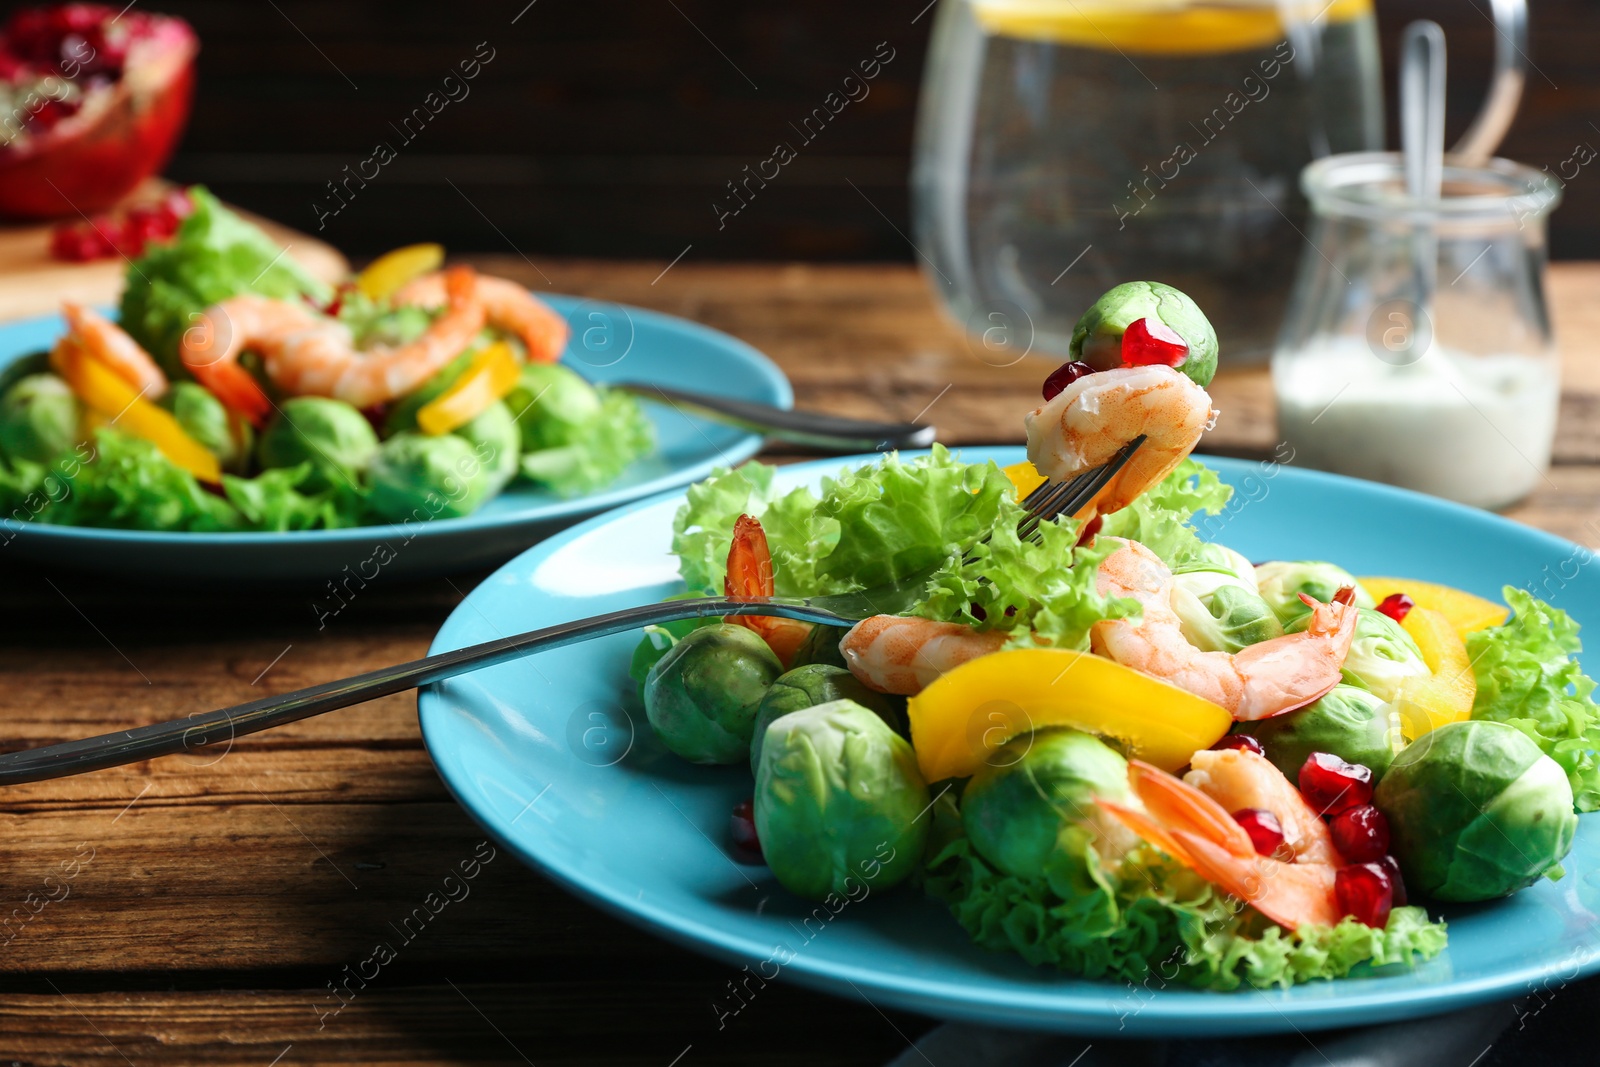 Photo of Tasty salad with Brussels sprouts served on wooden table